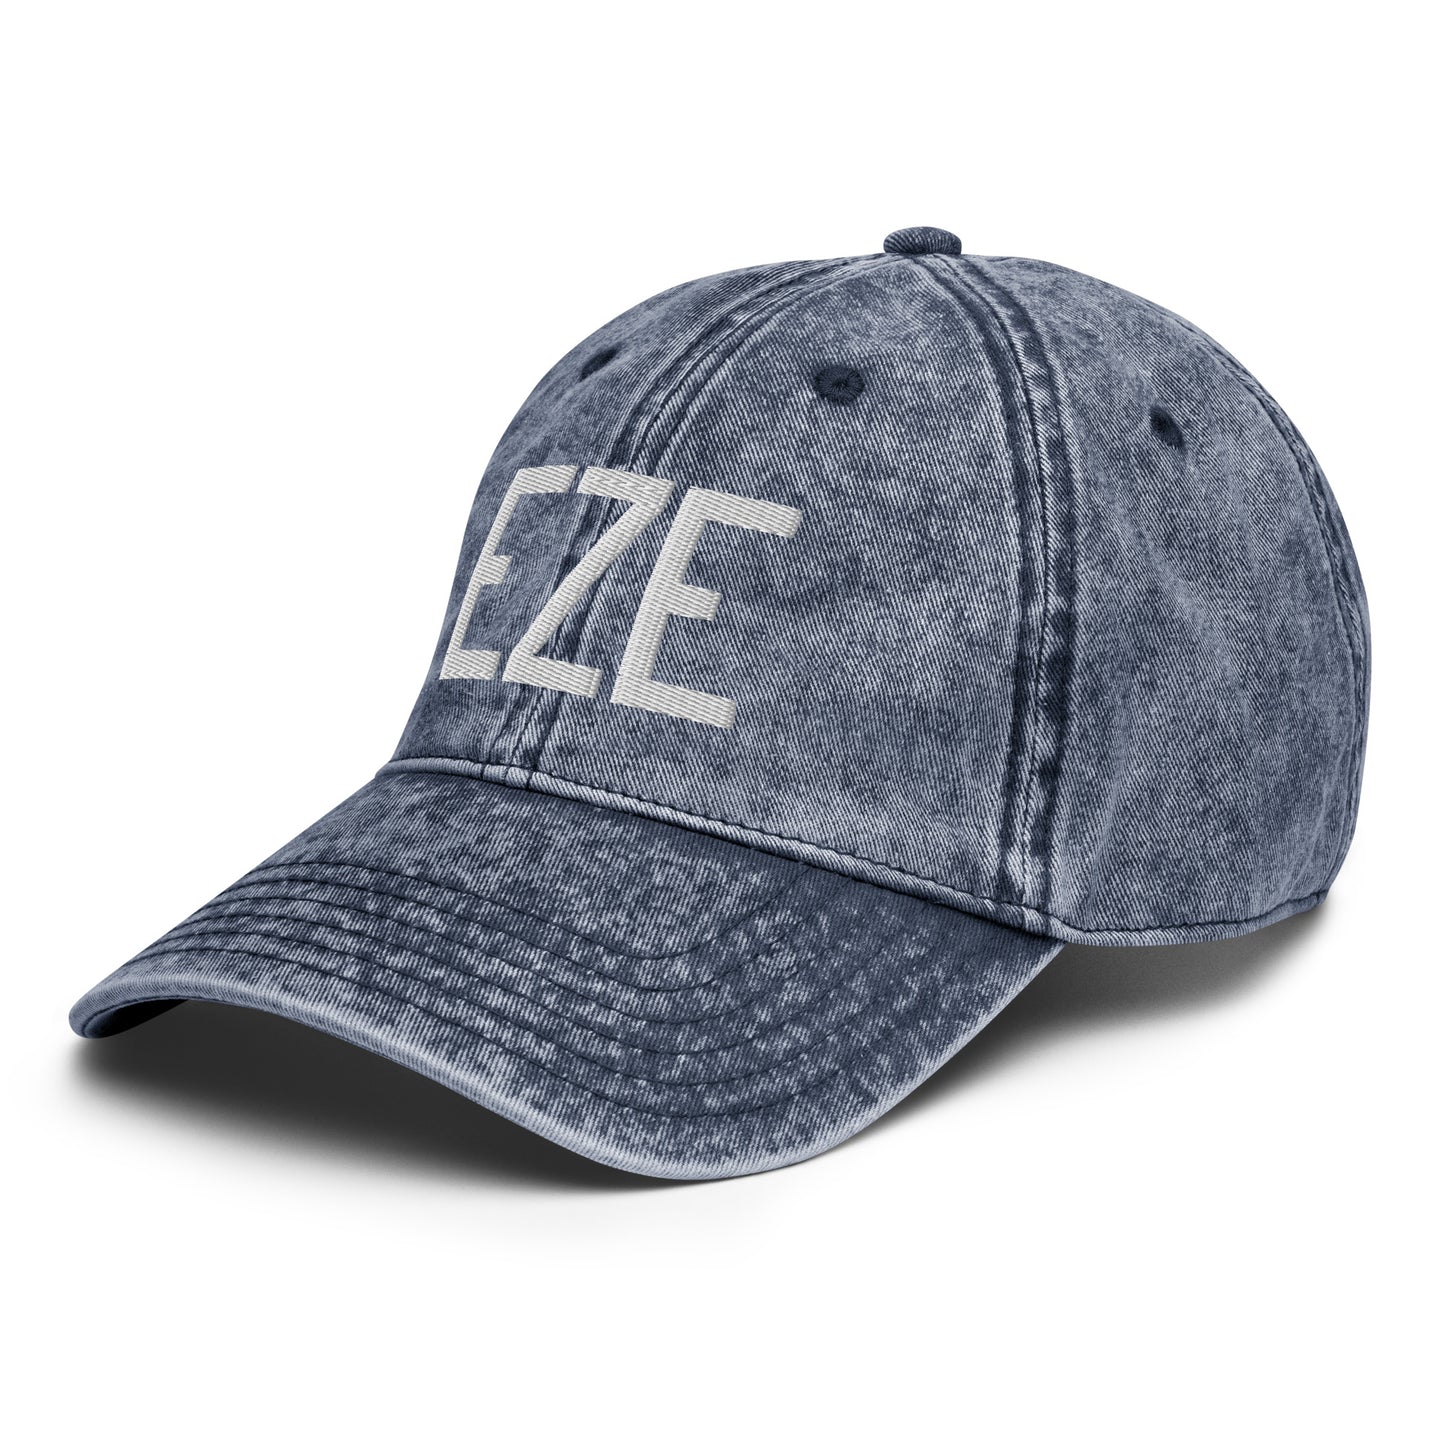 Airport Code Twill Cap - White • EZE Buenos Aires • YHM Designs - Image 17